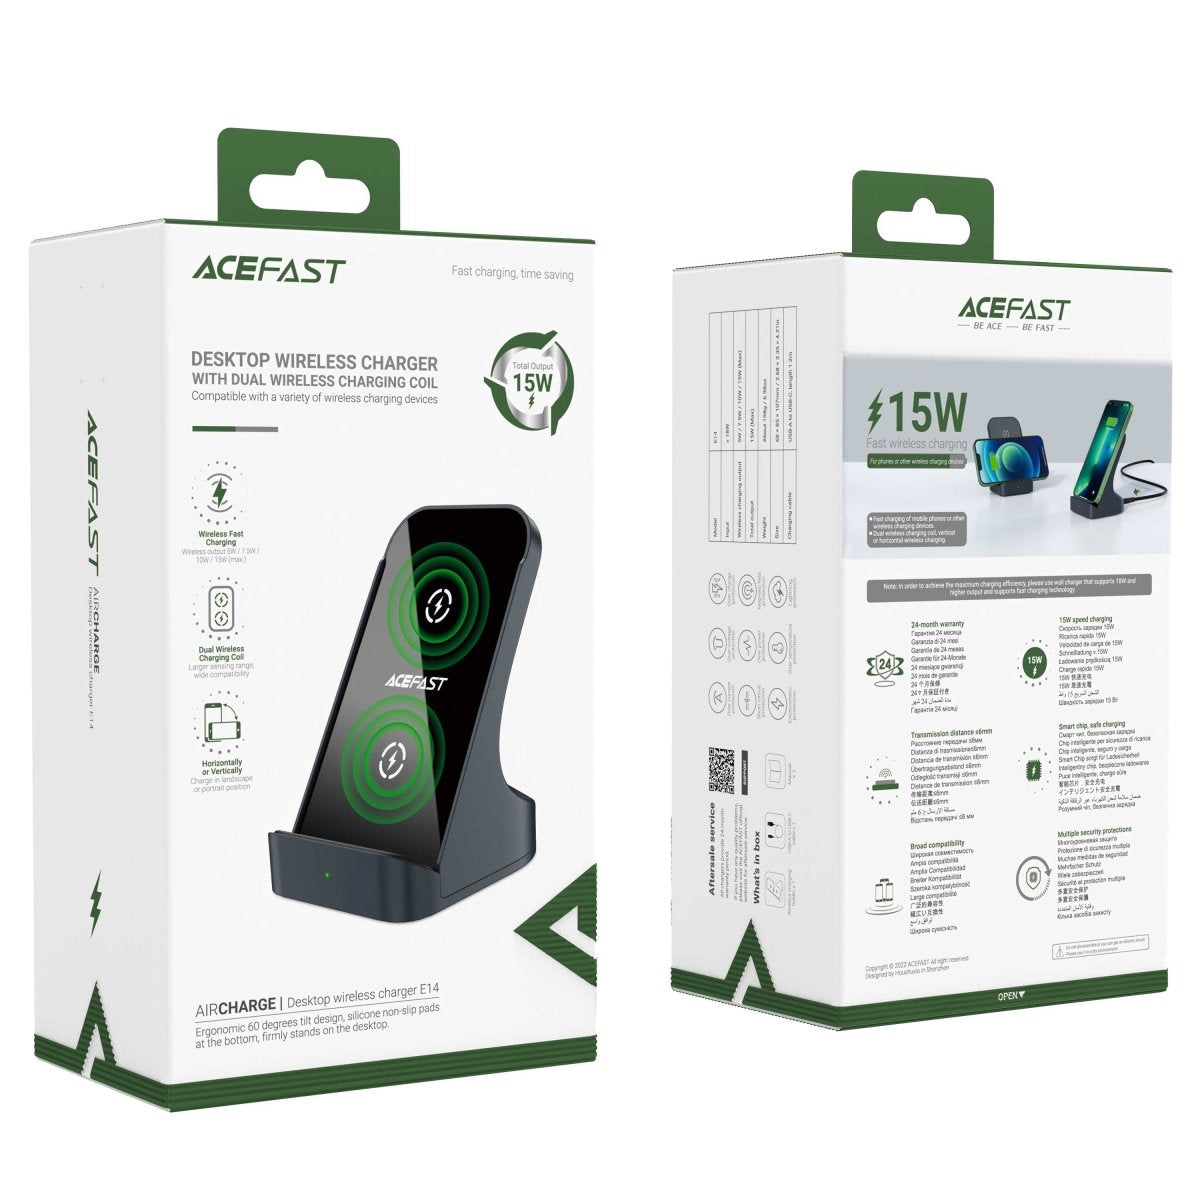 ACEFASTACEFAST Wireless Charging Simplified with E14 Desktop Charger